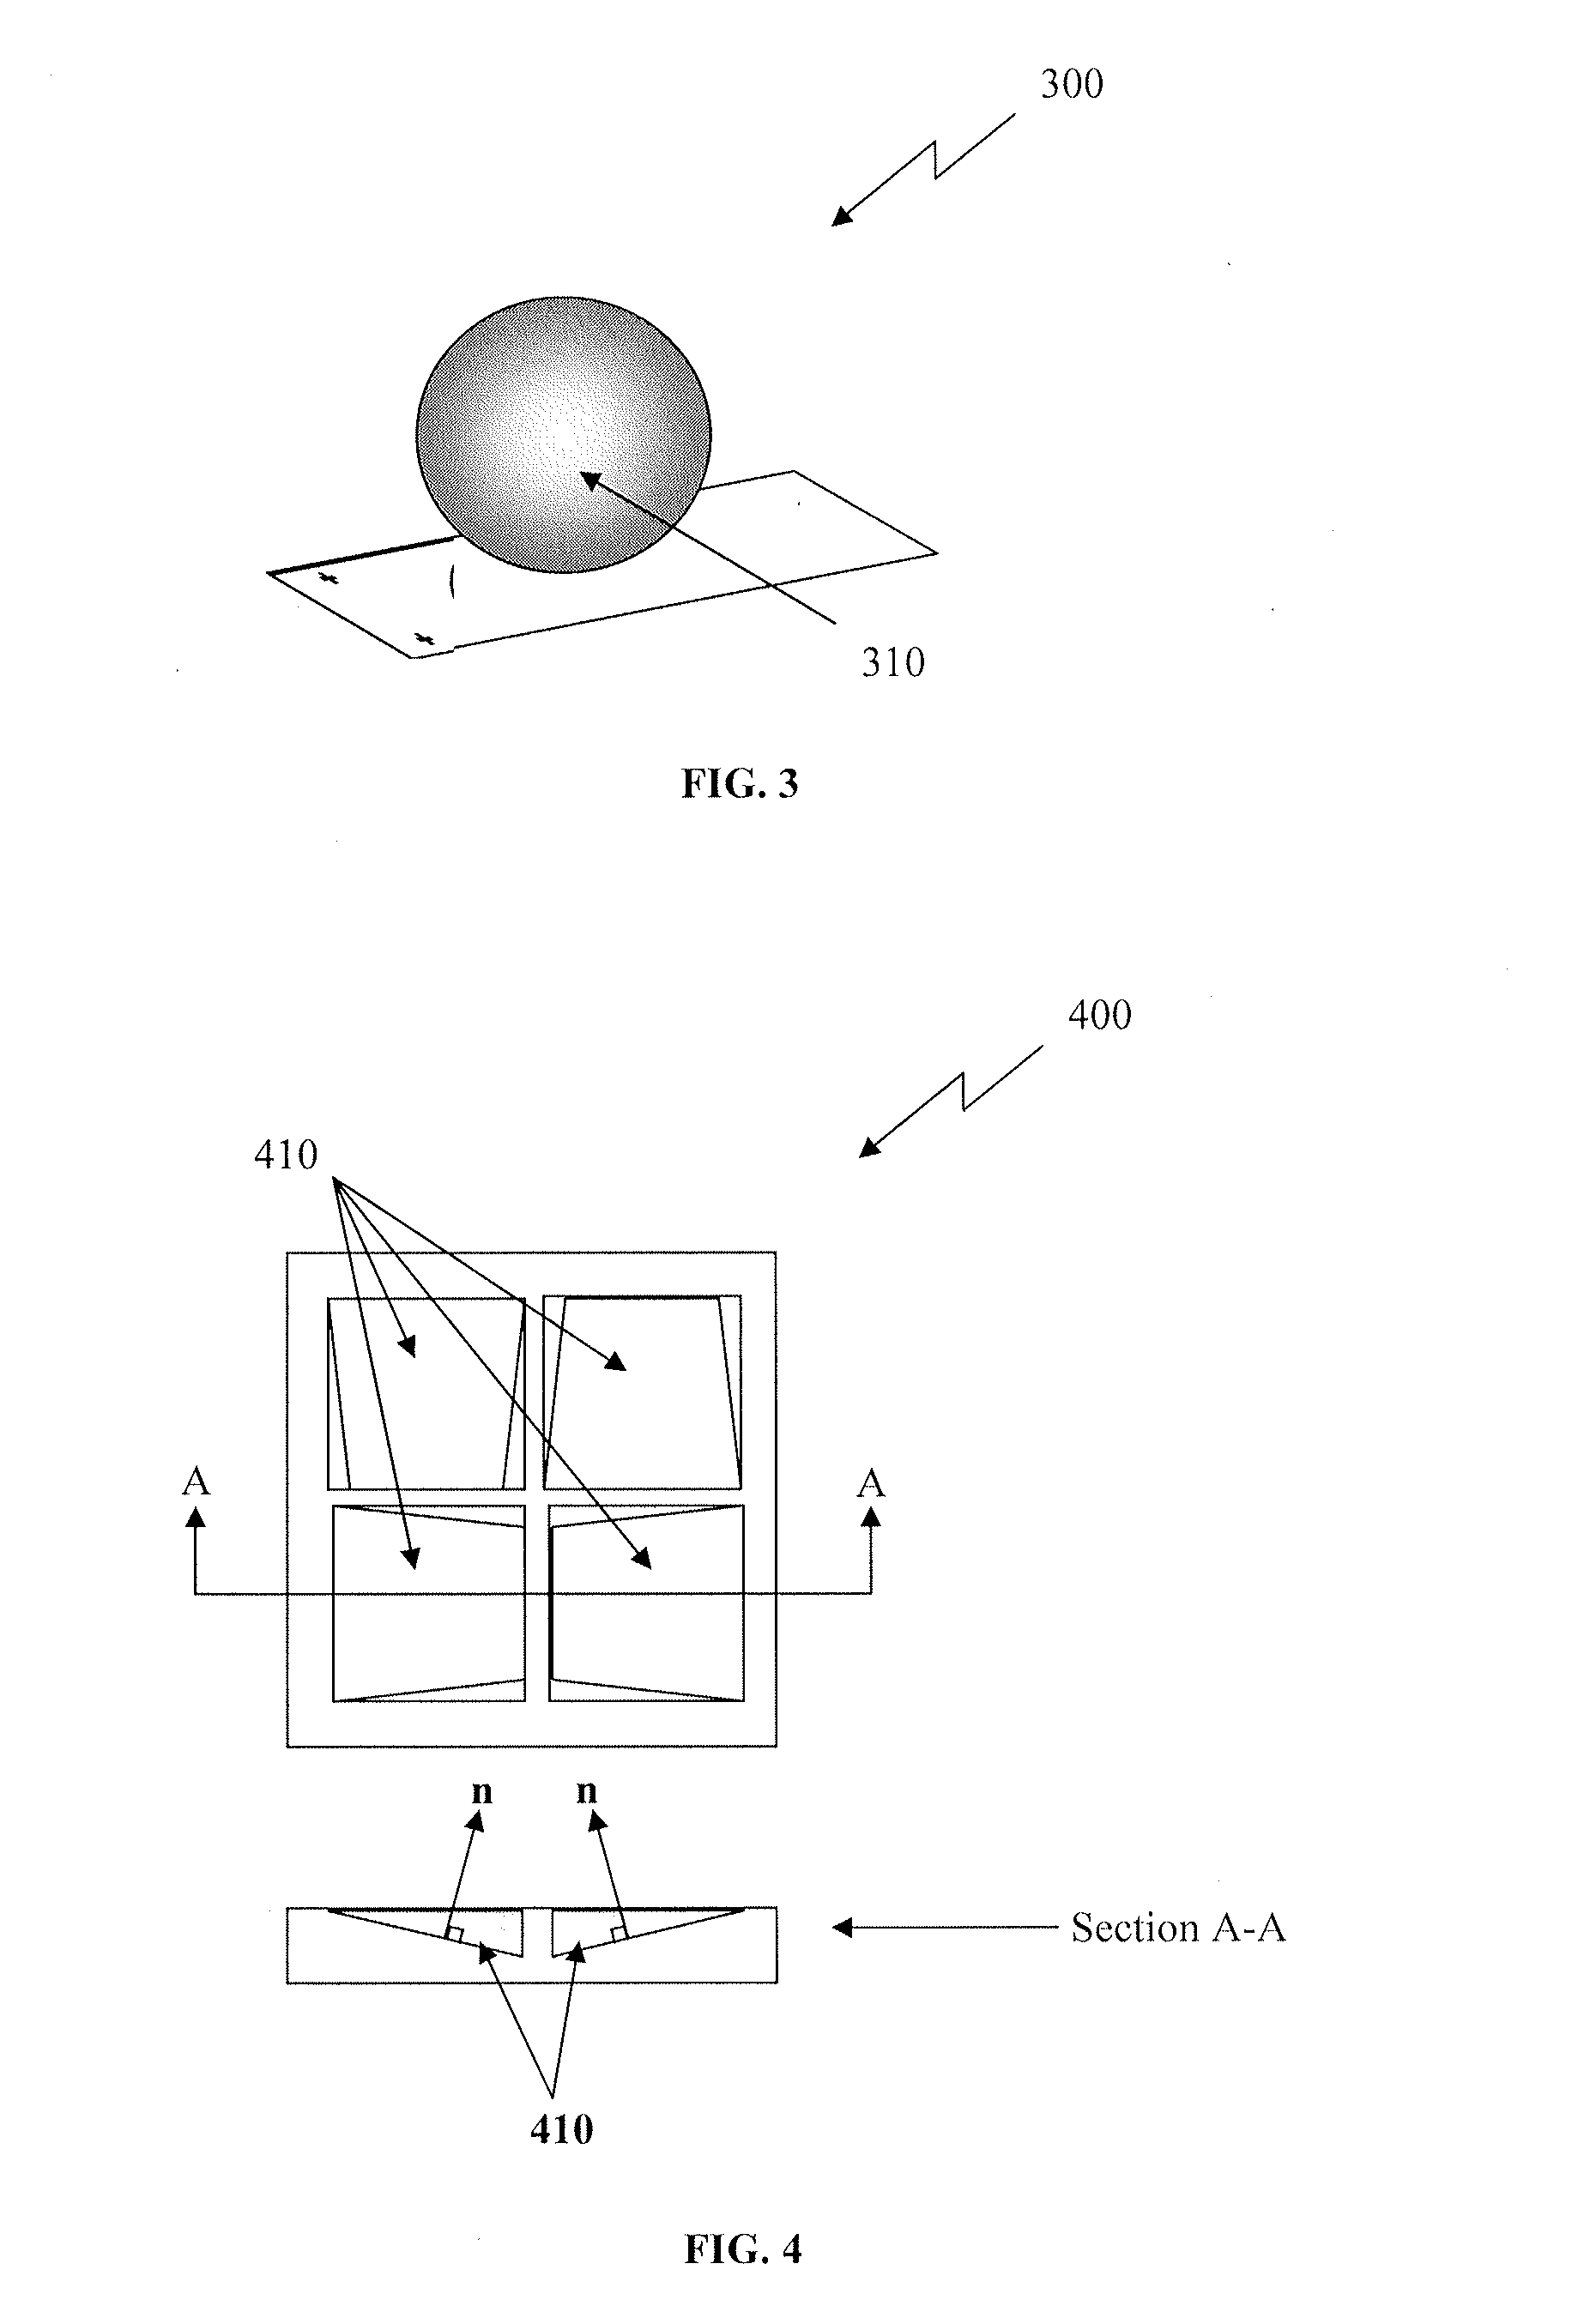 Imaging Apparatus, Systems and Methods